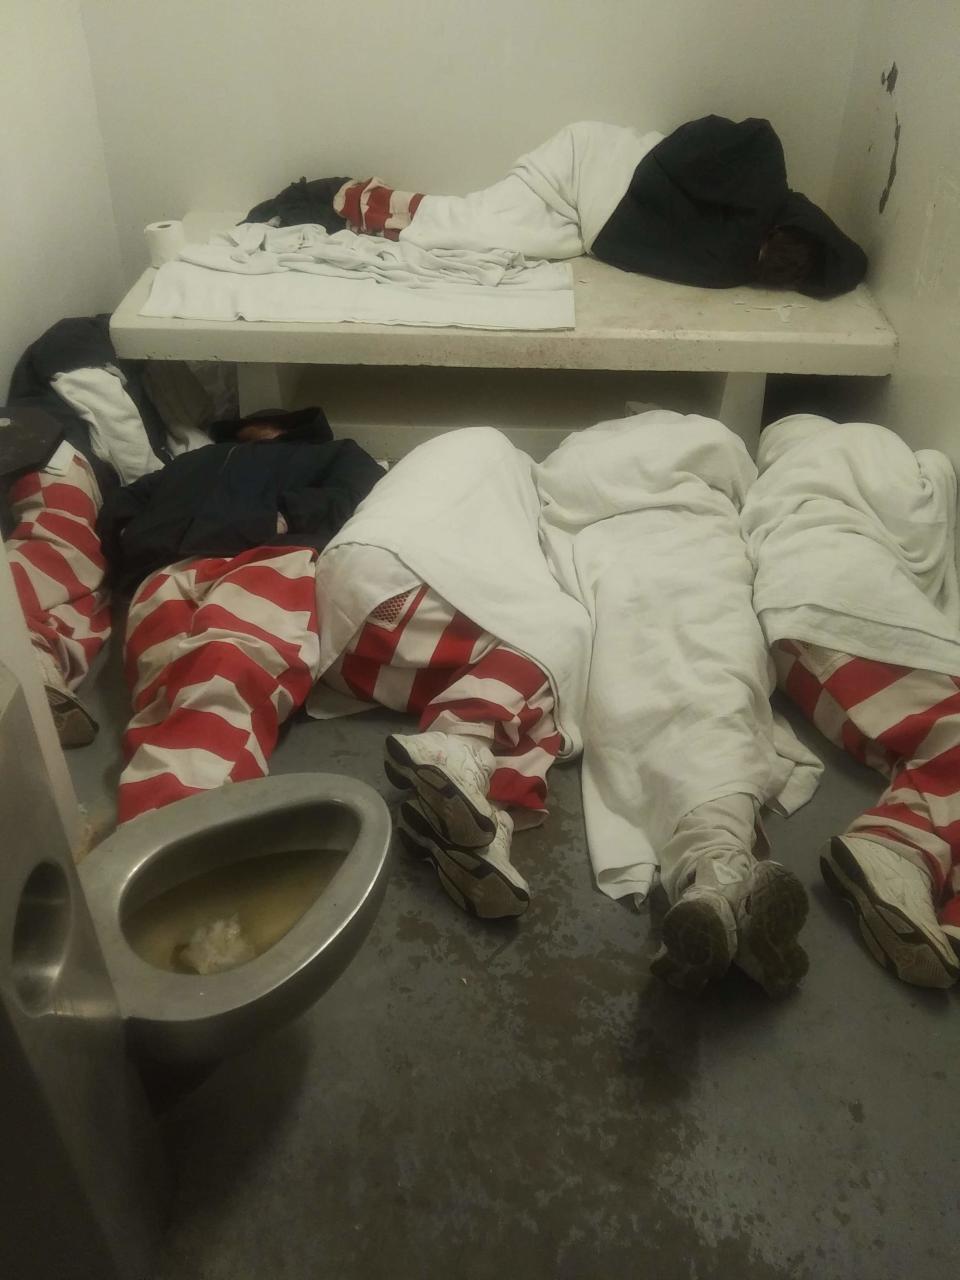 This undated photo taken by an inmate at Mississippi State Penitentiary at Parchman and provided to The Associated Press shows inmates seen lying on the floor next to a full toilet. After violence at the prison on Jan. 2, 2020, guards and state troopers marched some prisoners at Parchman into Unit 32, a cell block closed in 2011 as part of a settlement; the inmate says the unit has no running water or mattresses, and is plagued by mold and issues. (Courtesy photo via AP)